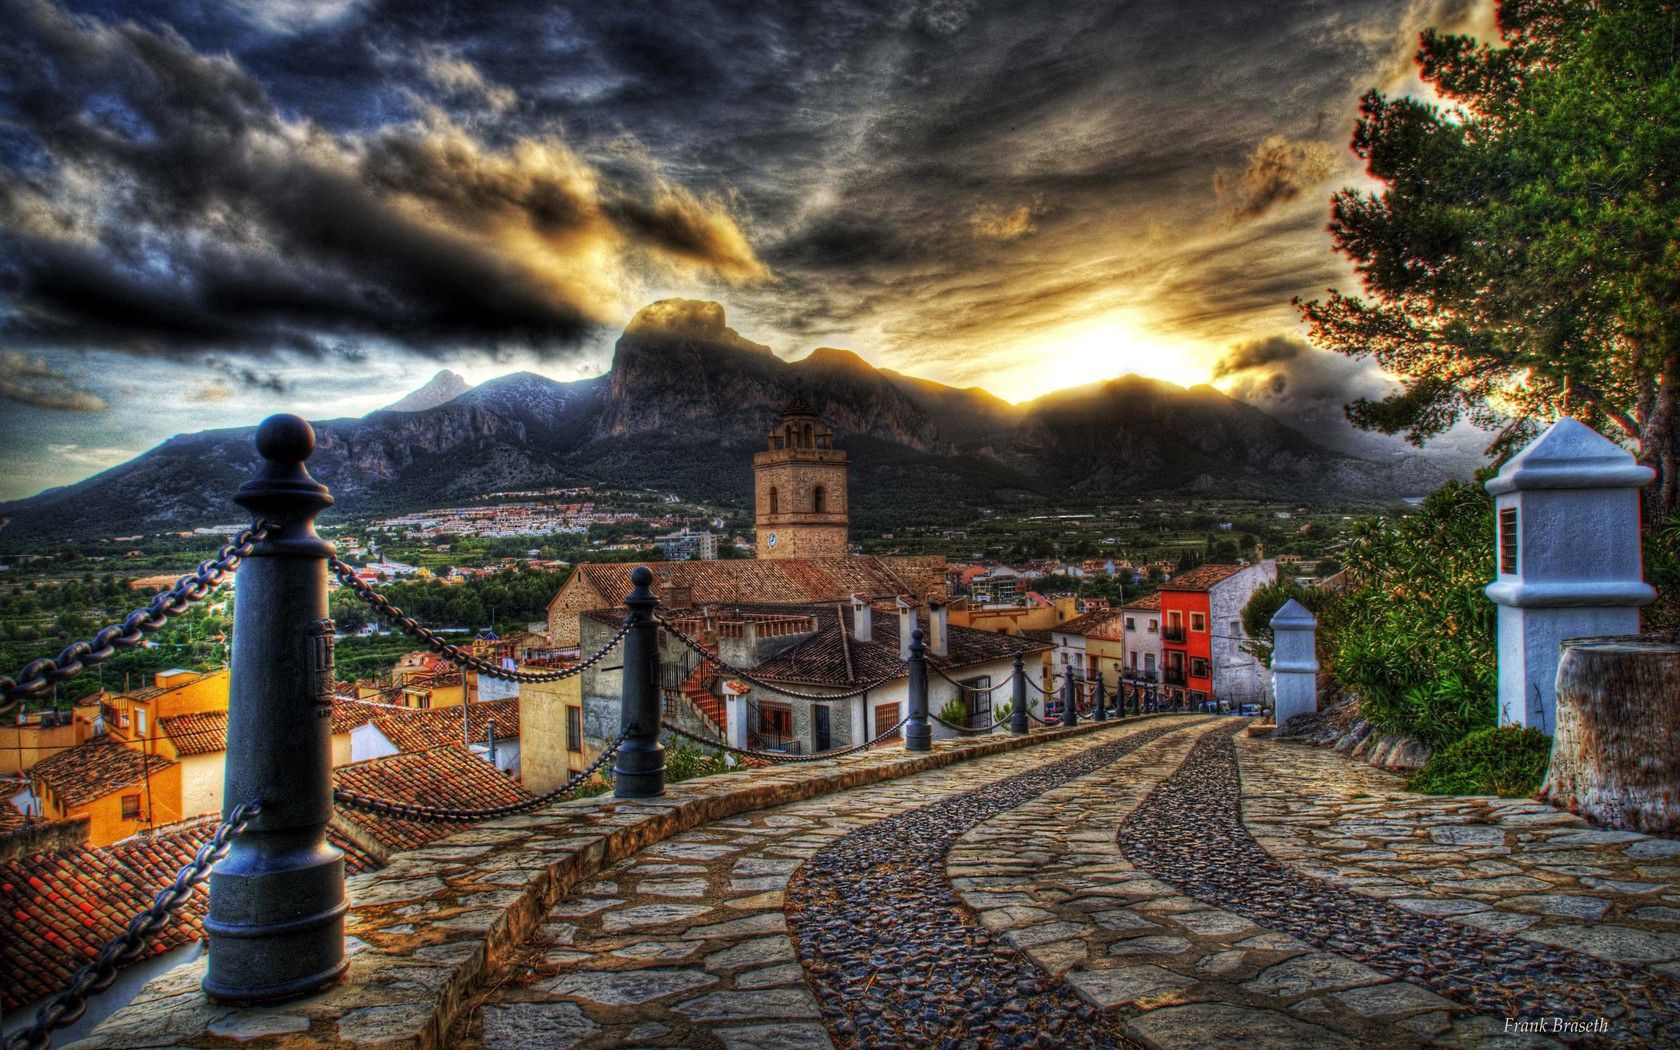 streets, sky, cities, flowers, houses, sunset, mountains, architecture, clouds, road, beautiful, old, colorful, hdr High Definition image